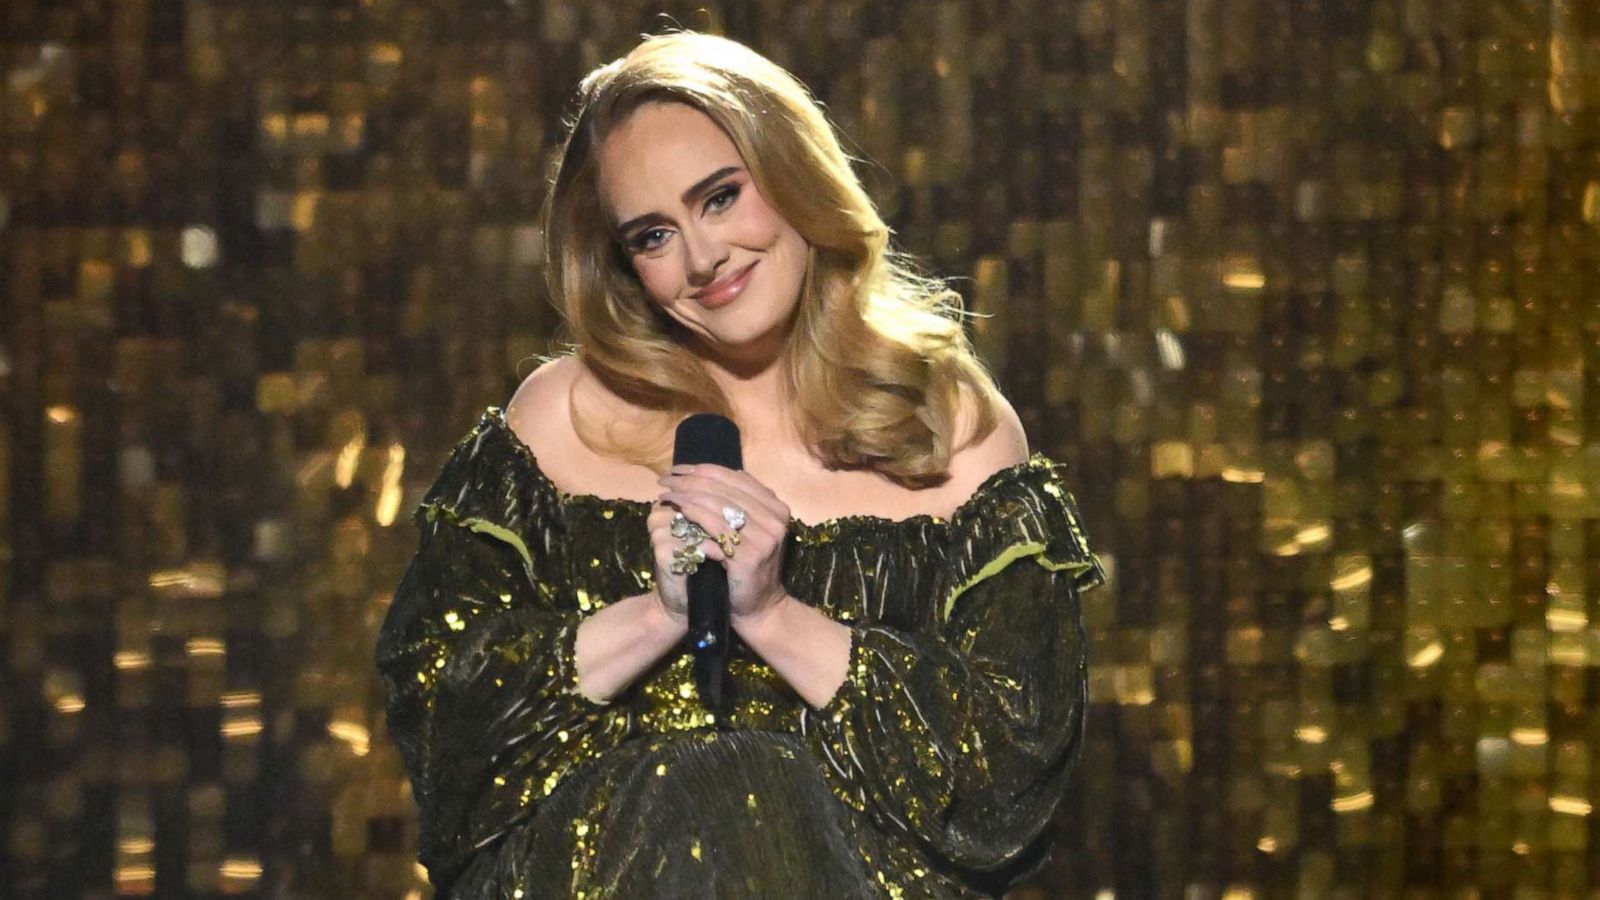 Adele wearing a gold dress while holding a mic